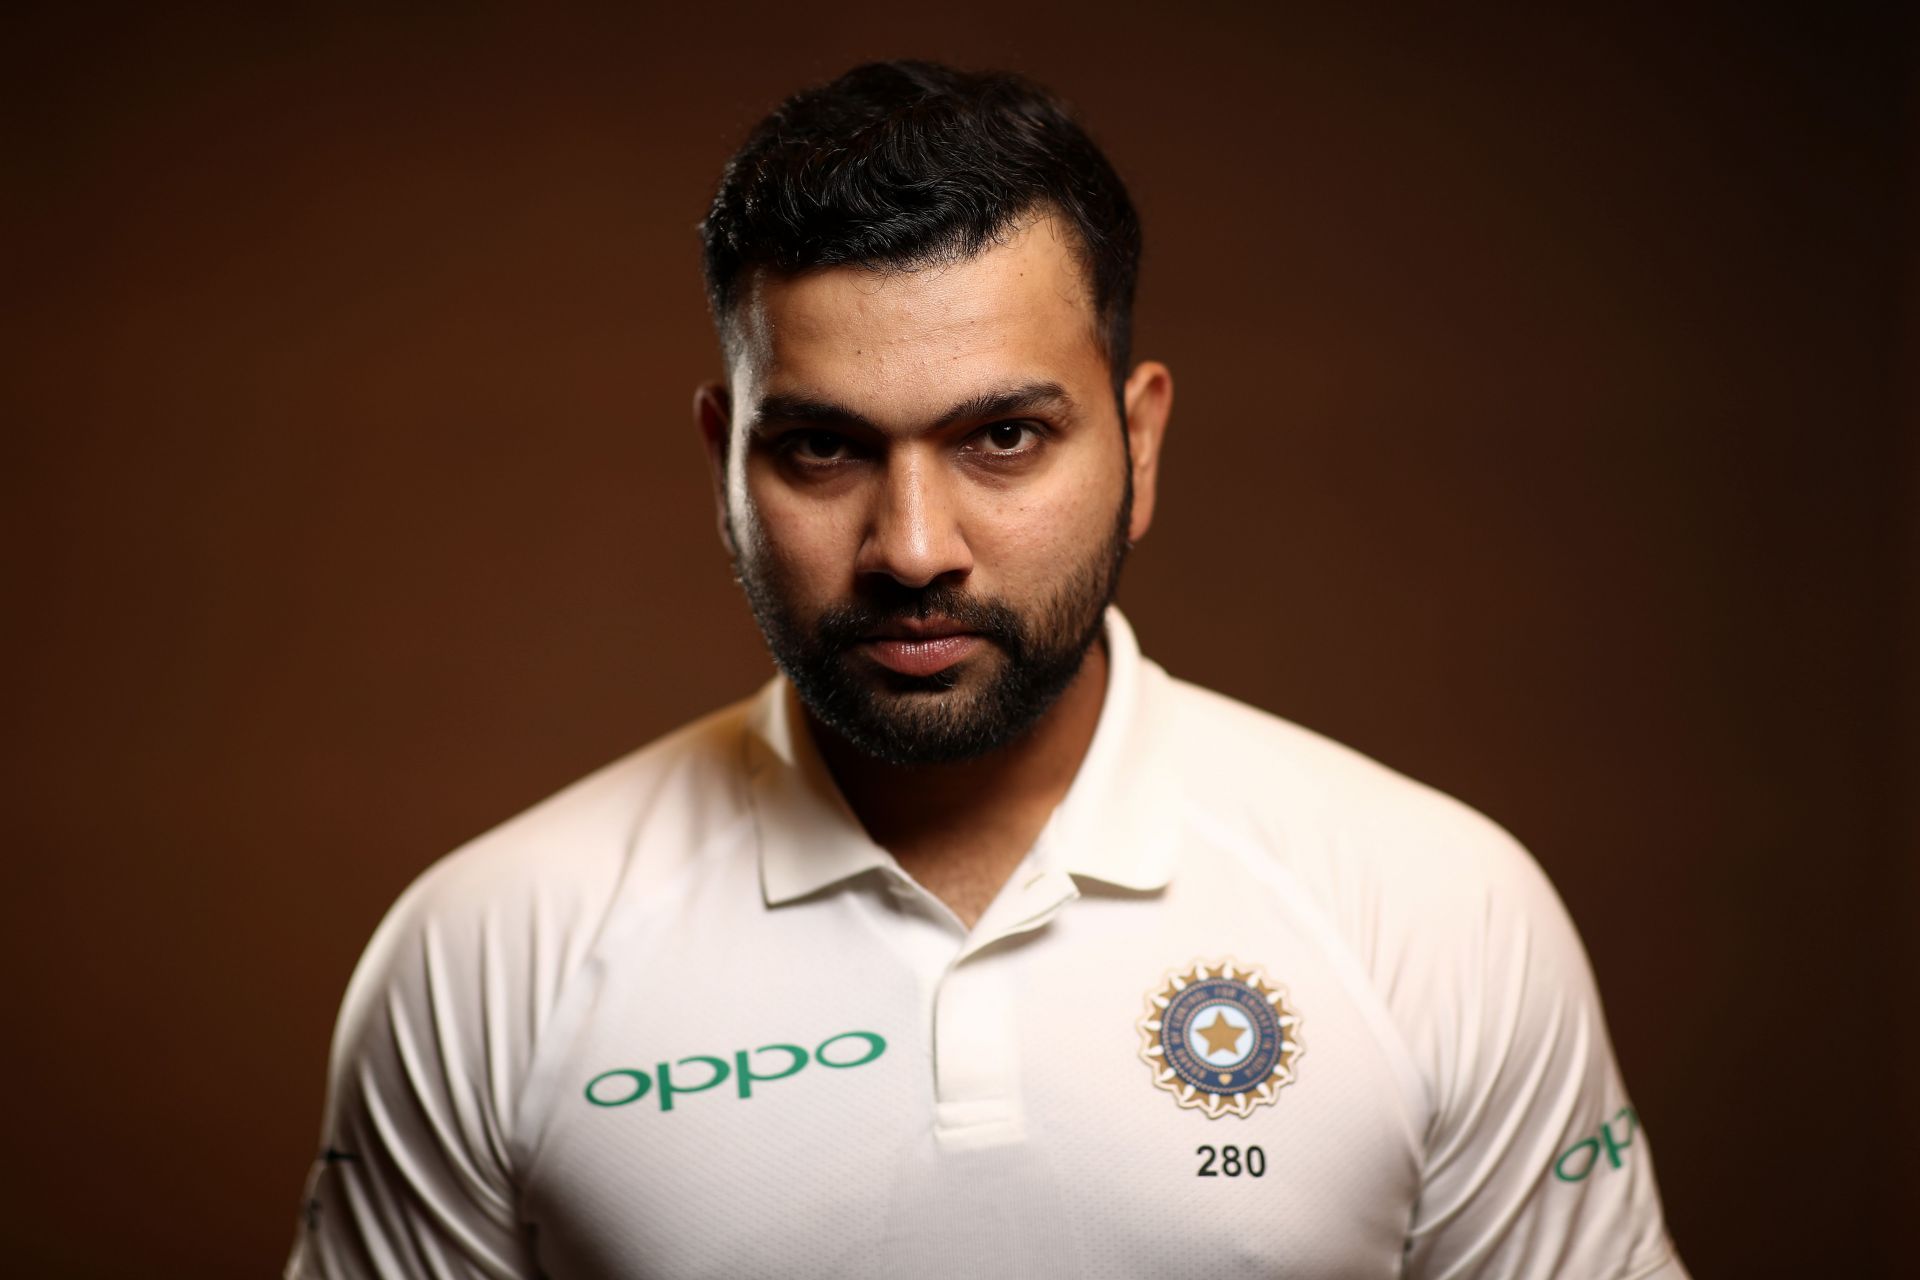 Rohit Sharma made his Test debut in 2013